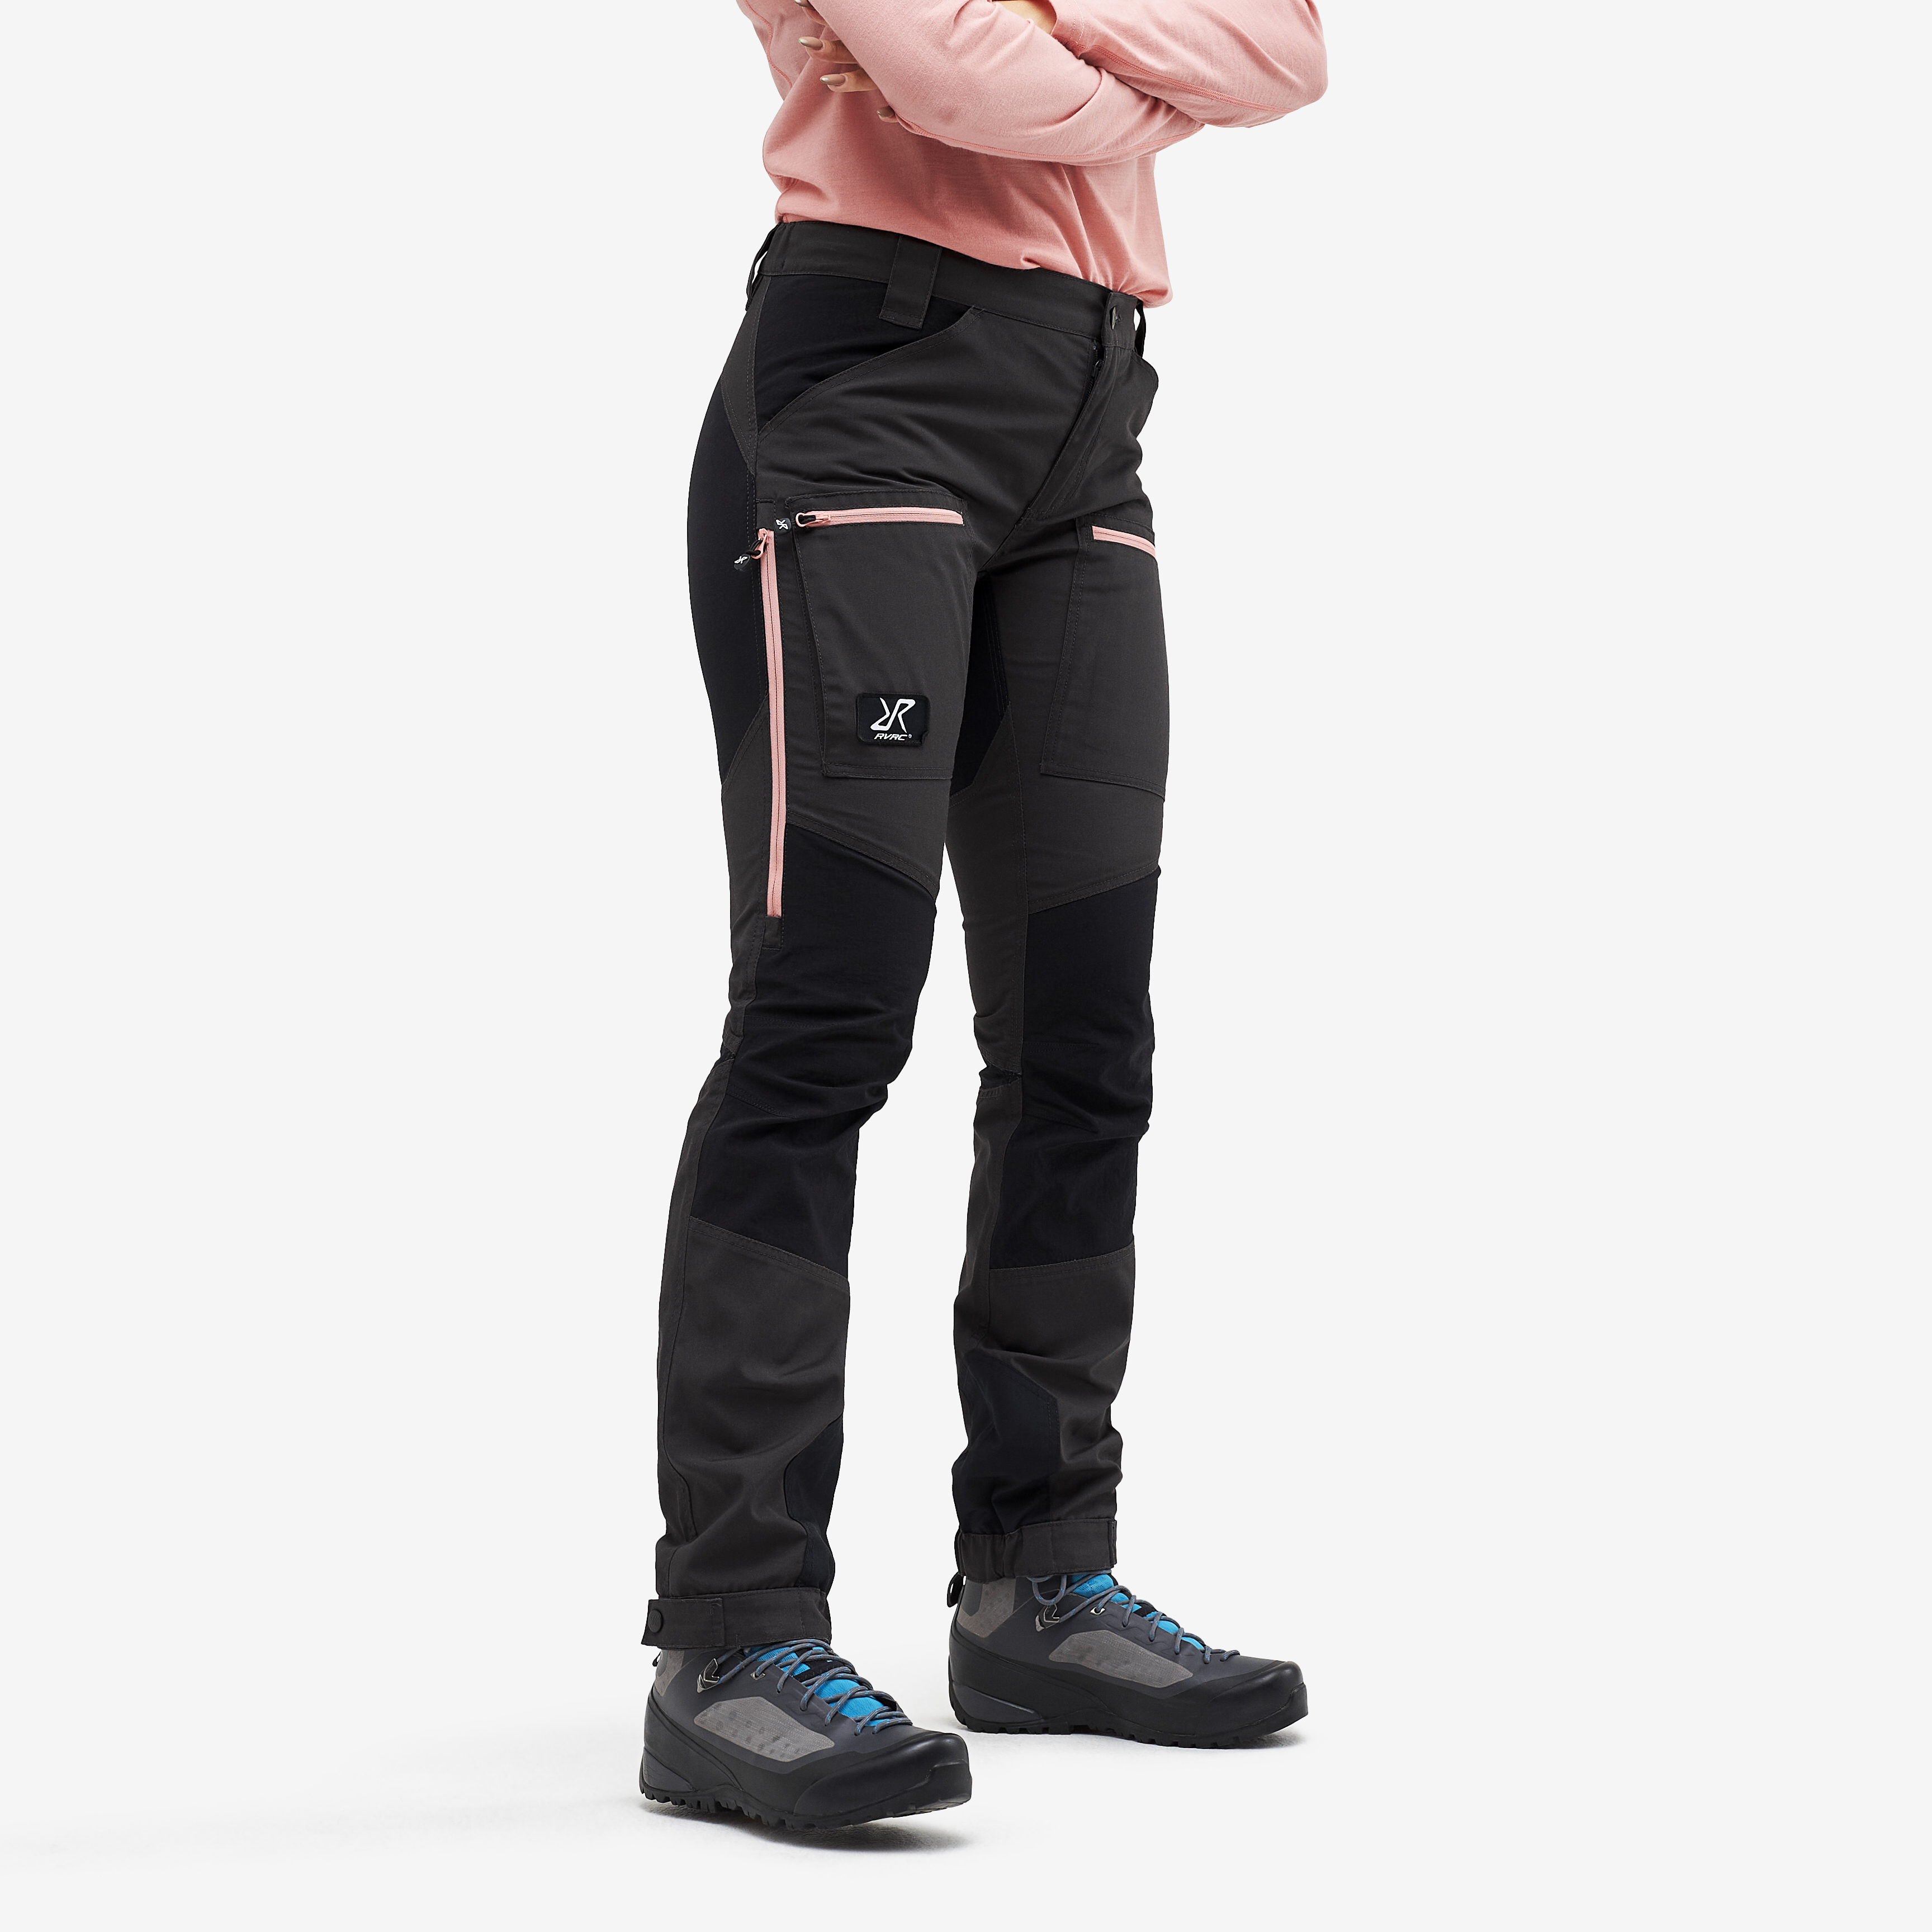 Nordwand Pro Trousers Anthracite/Dusty pink Women